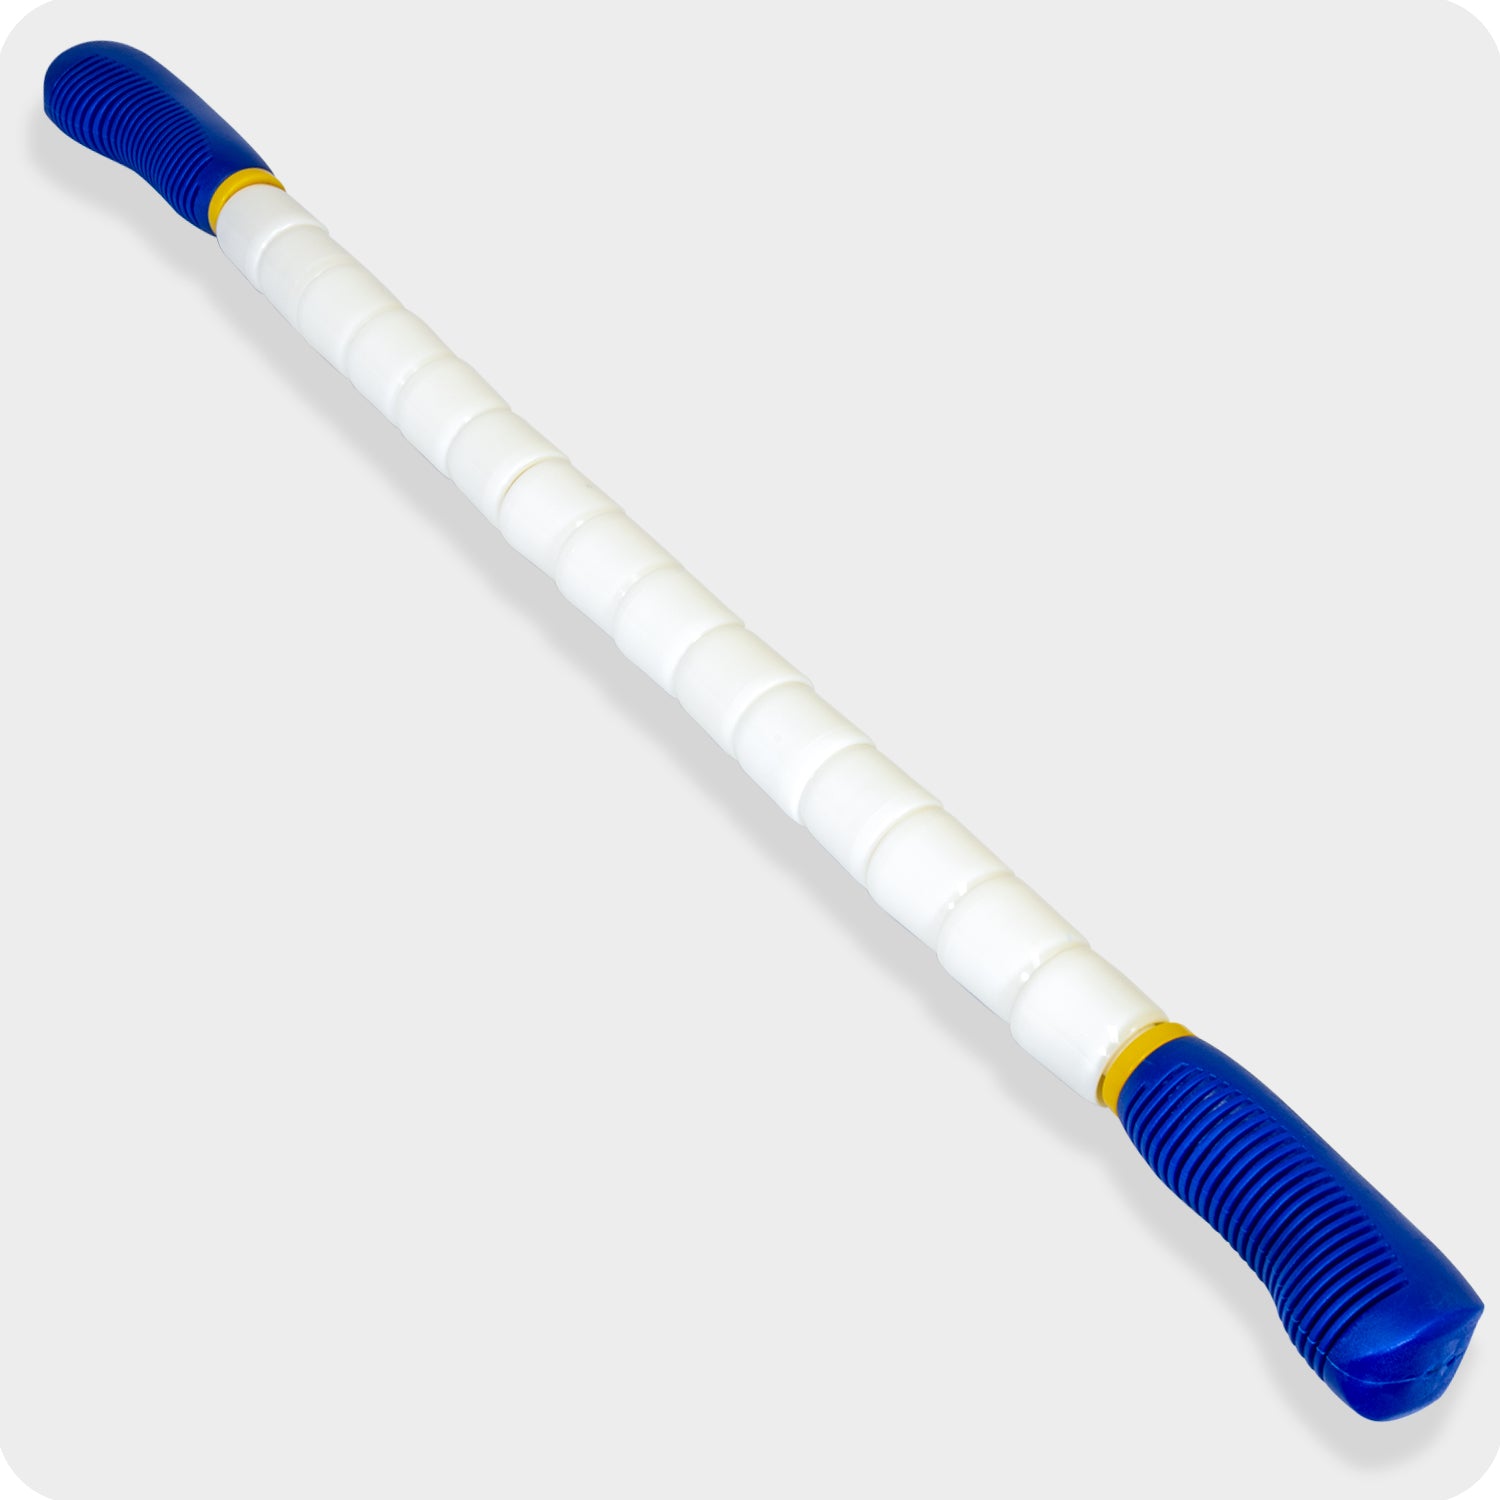 The Stick - Relief For Muscle Pain, Soreness and Injury - Online sale of The  Stick massage tool